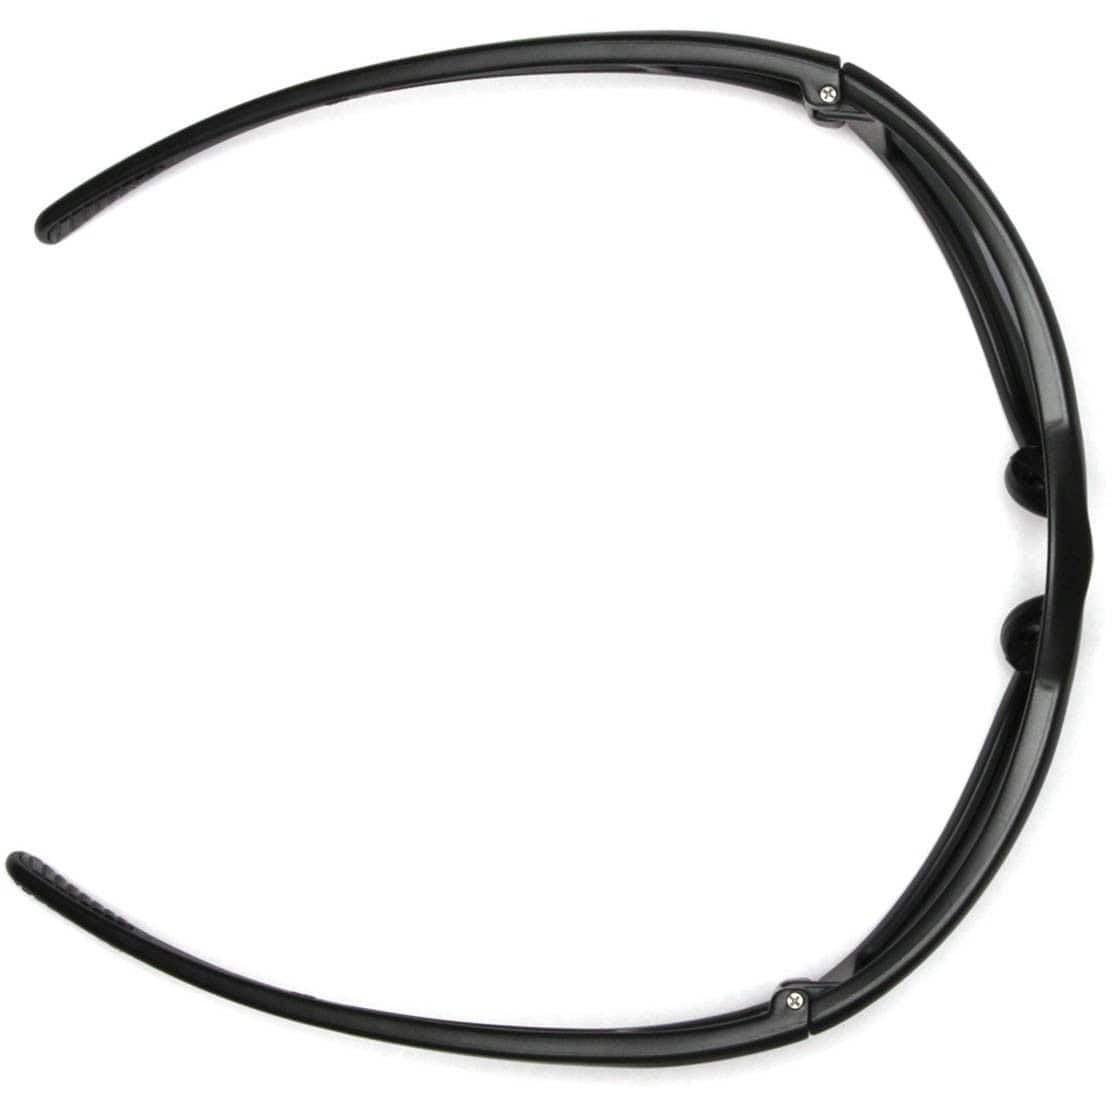 Pyramex Exeter Safety Glasses with Black Frame and Silver Mirror Anti-Fog Lens SB5170DT Top